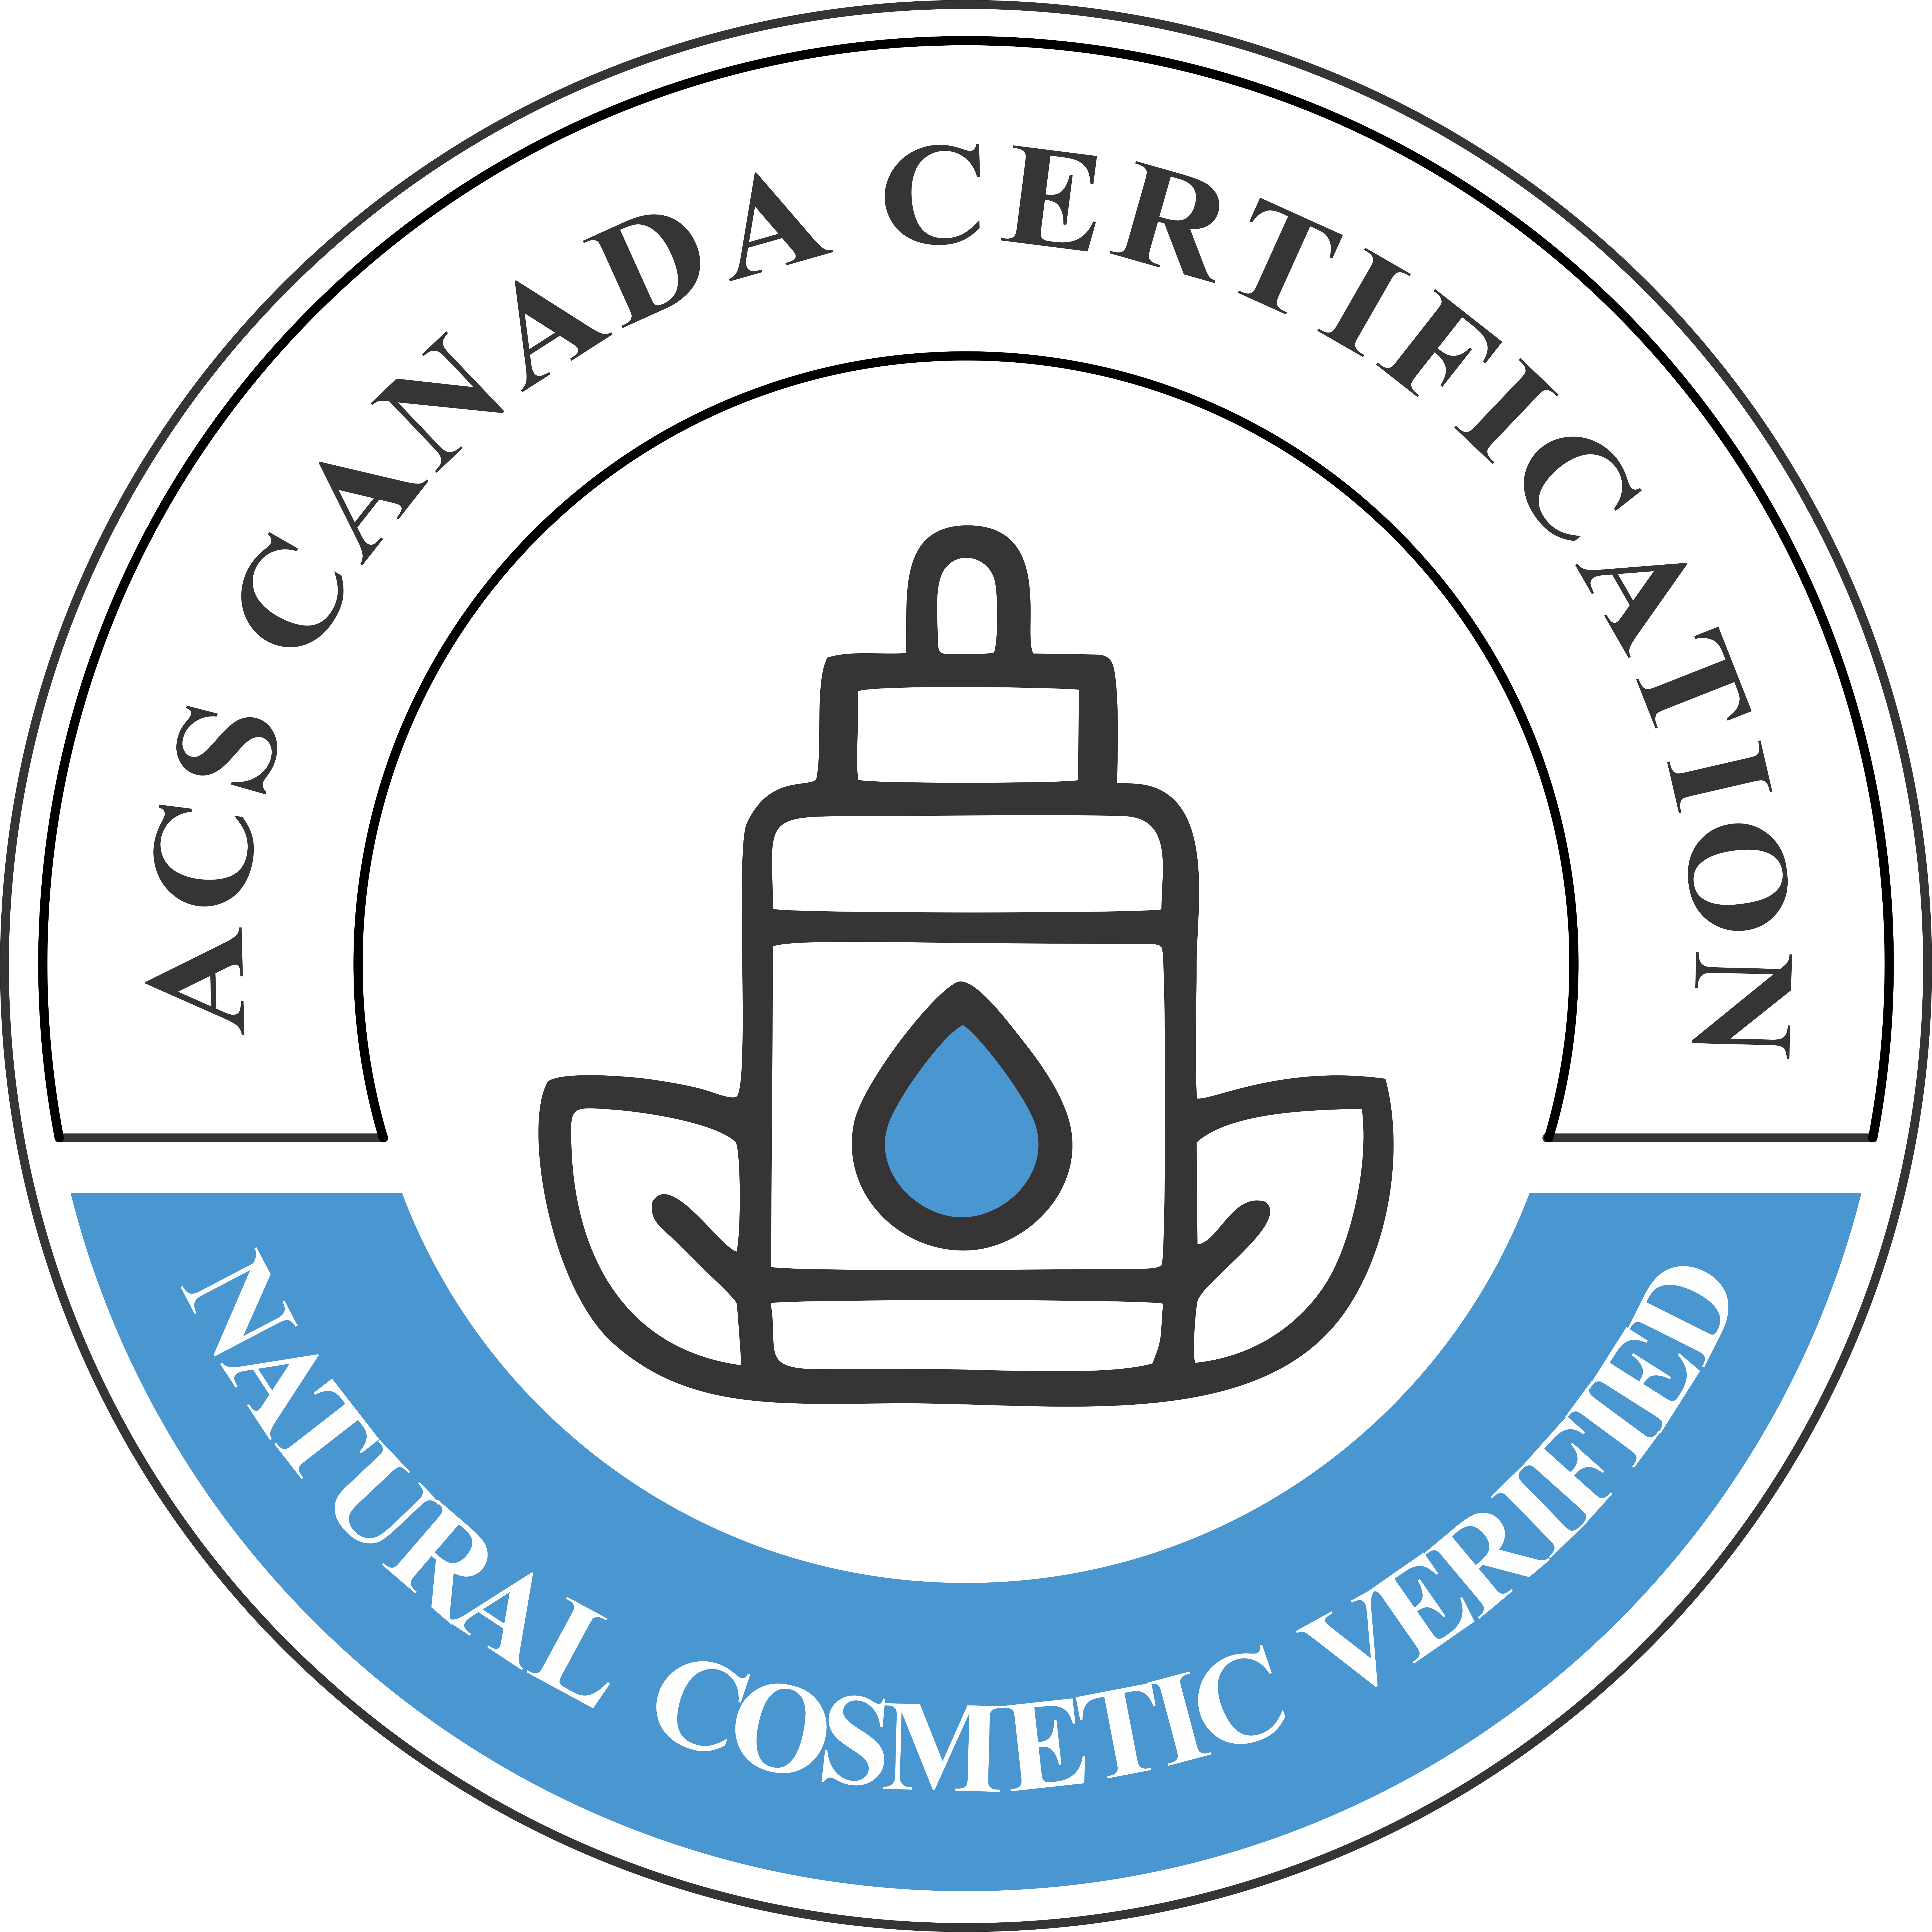 COSMETIC PRODUCTS - canadacerts.ca